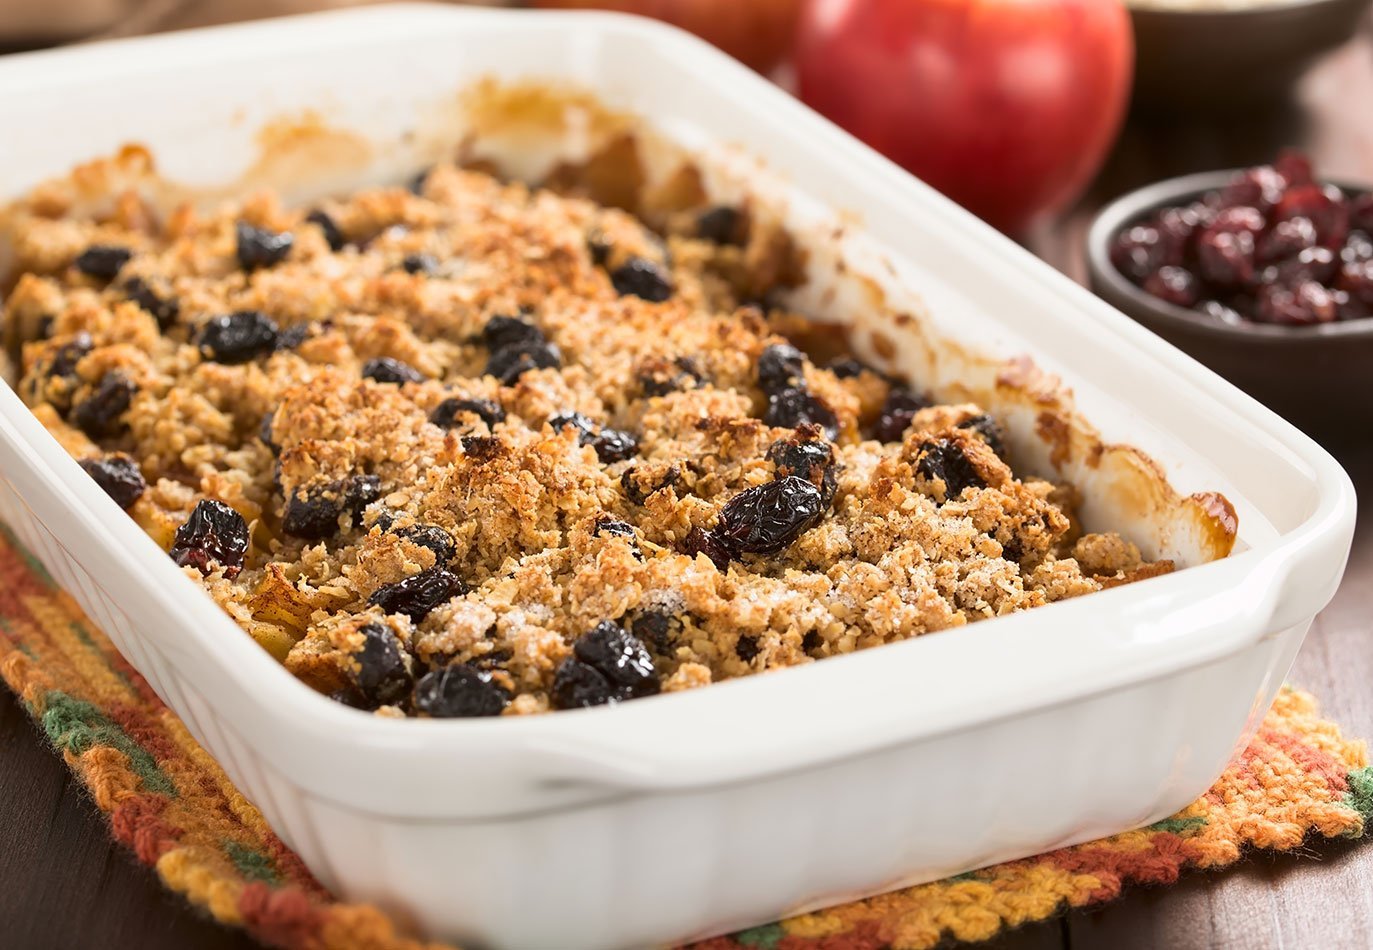 Apple Cranberry And Oatmeal Crumble Or Crisp